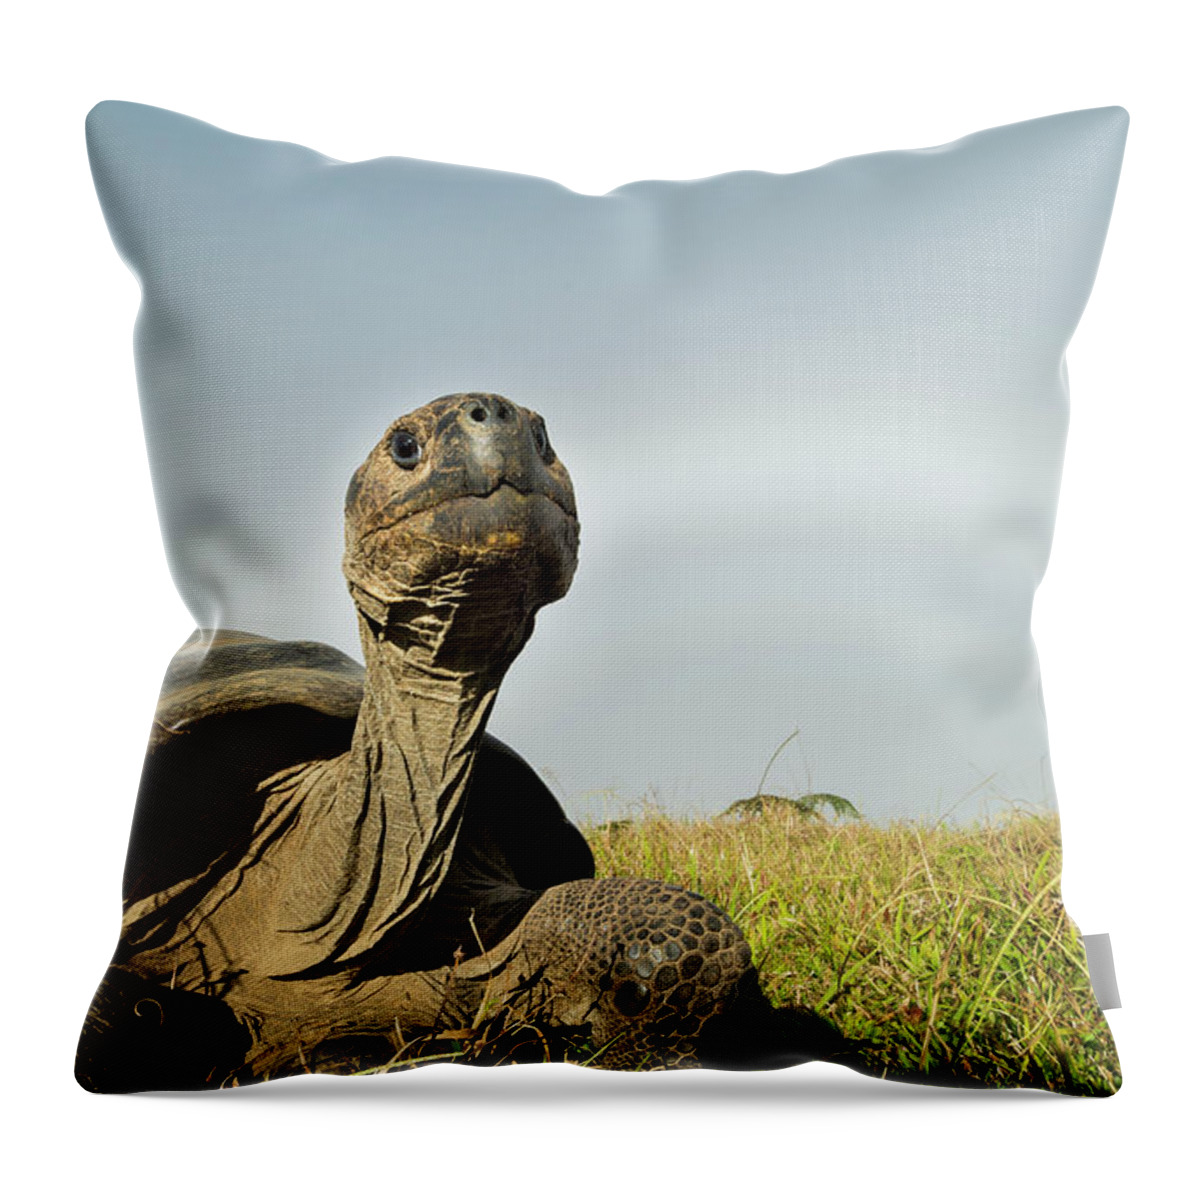 Animals Throw Pillow featuring the photograph Volcan Alcedo Tortoise And Fogbow by Tui De Roy